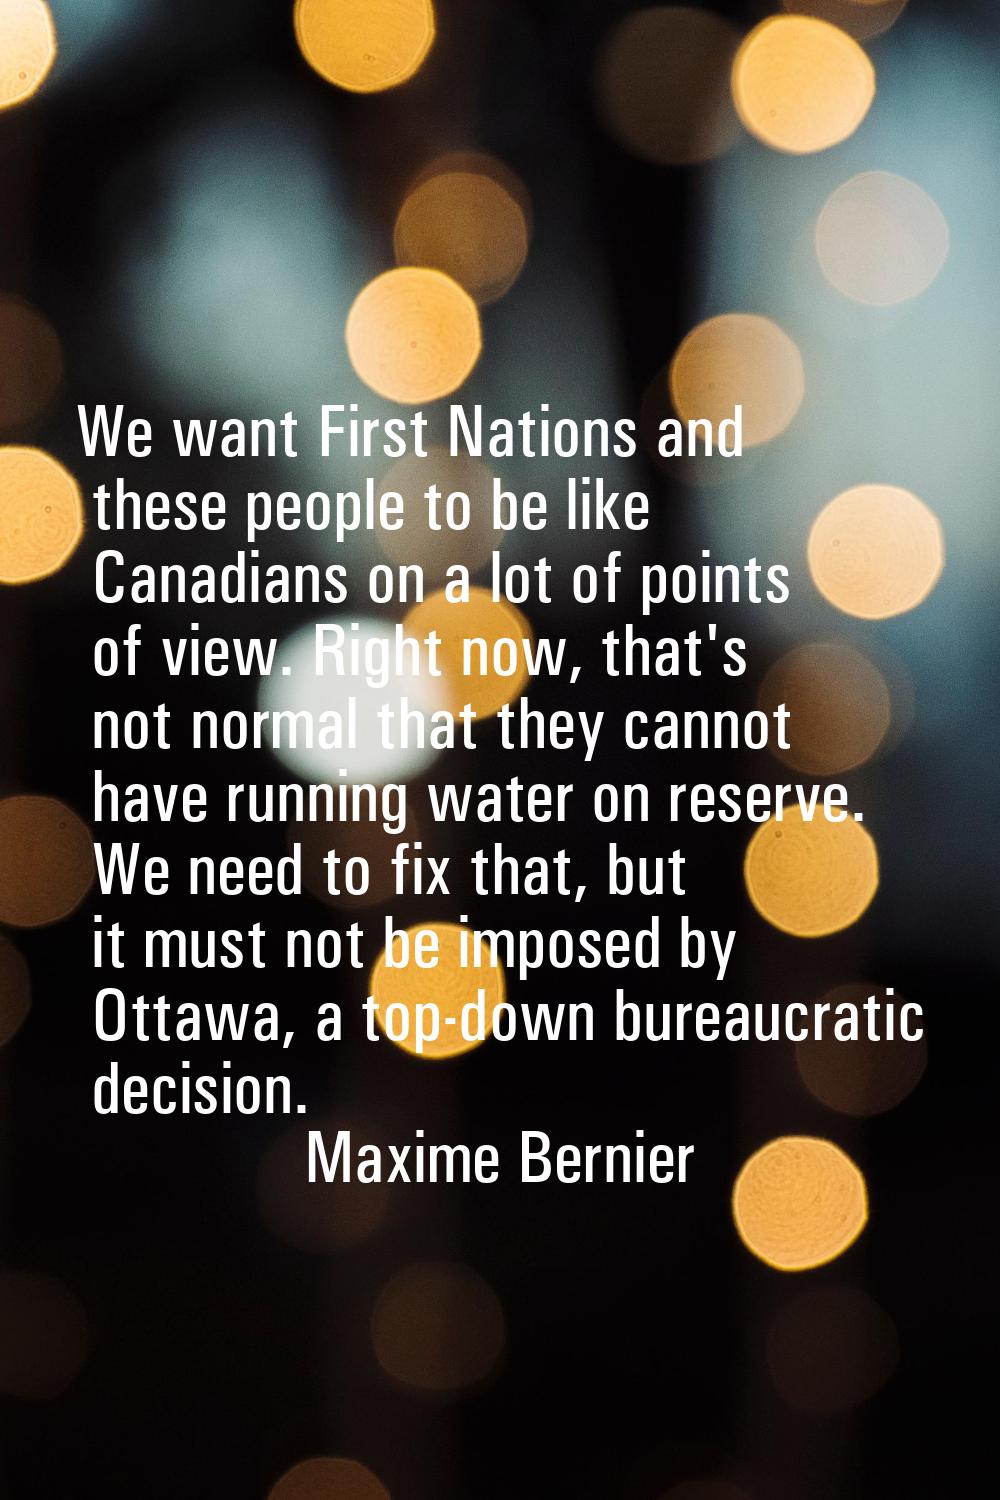 We want First Nations and these people to be like Canadians on a lot of points of view. Right now, 